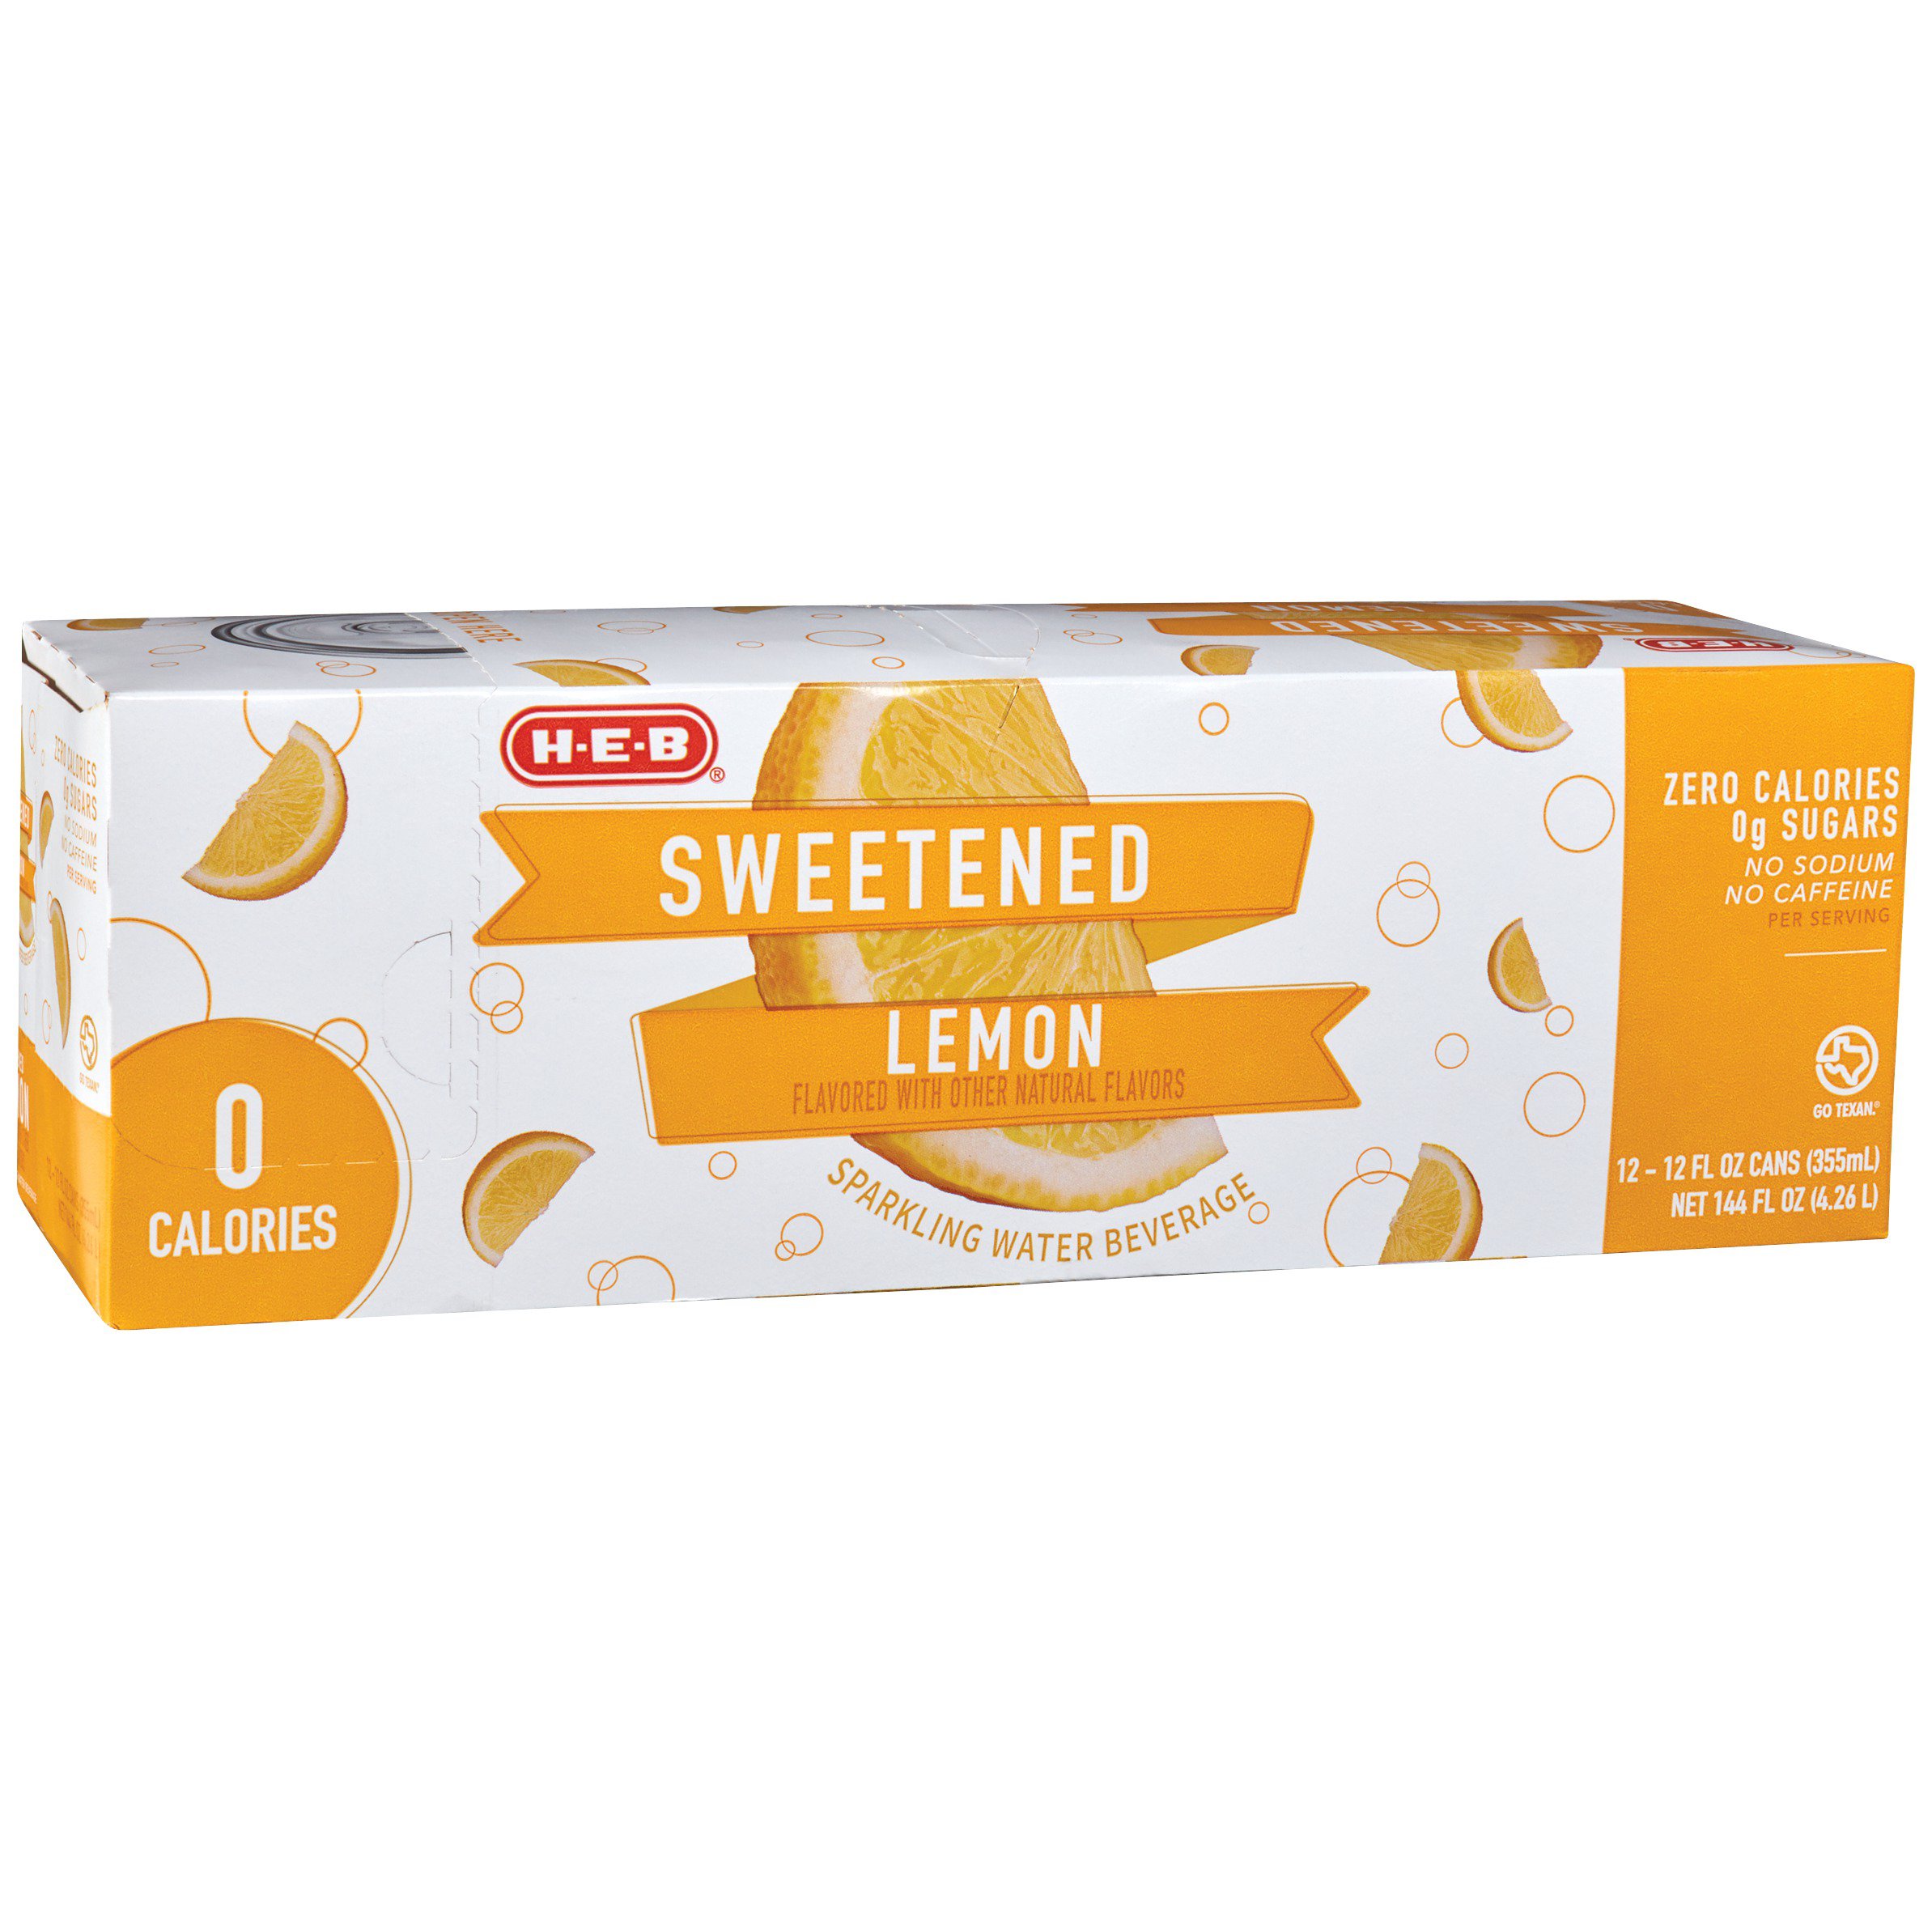 H-E-B Sweetened Lemon Sparkling Water 12 oz Cans - Shop Water at H-E-B